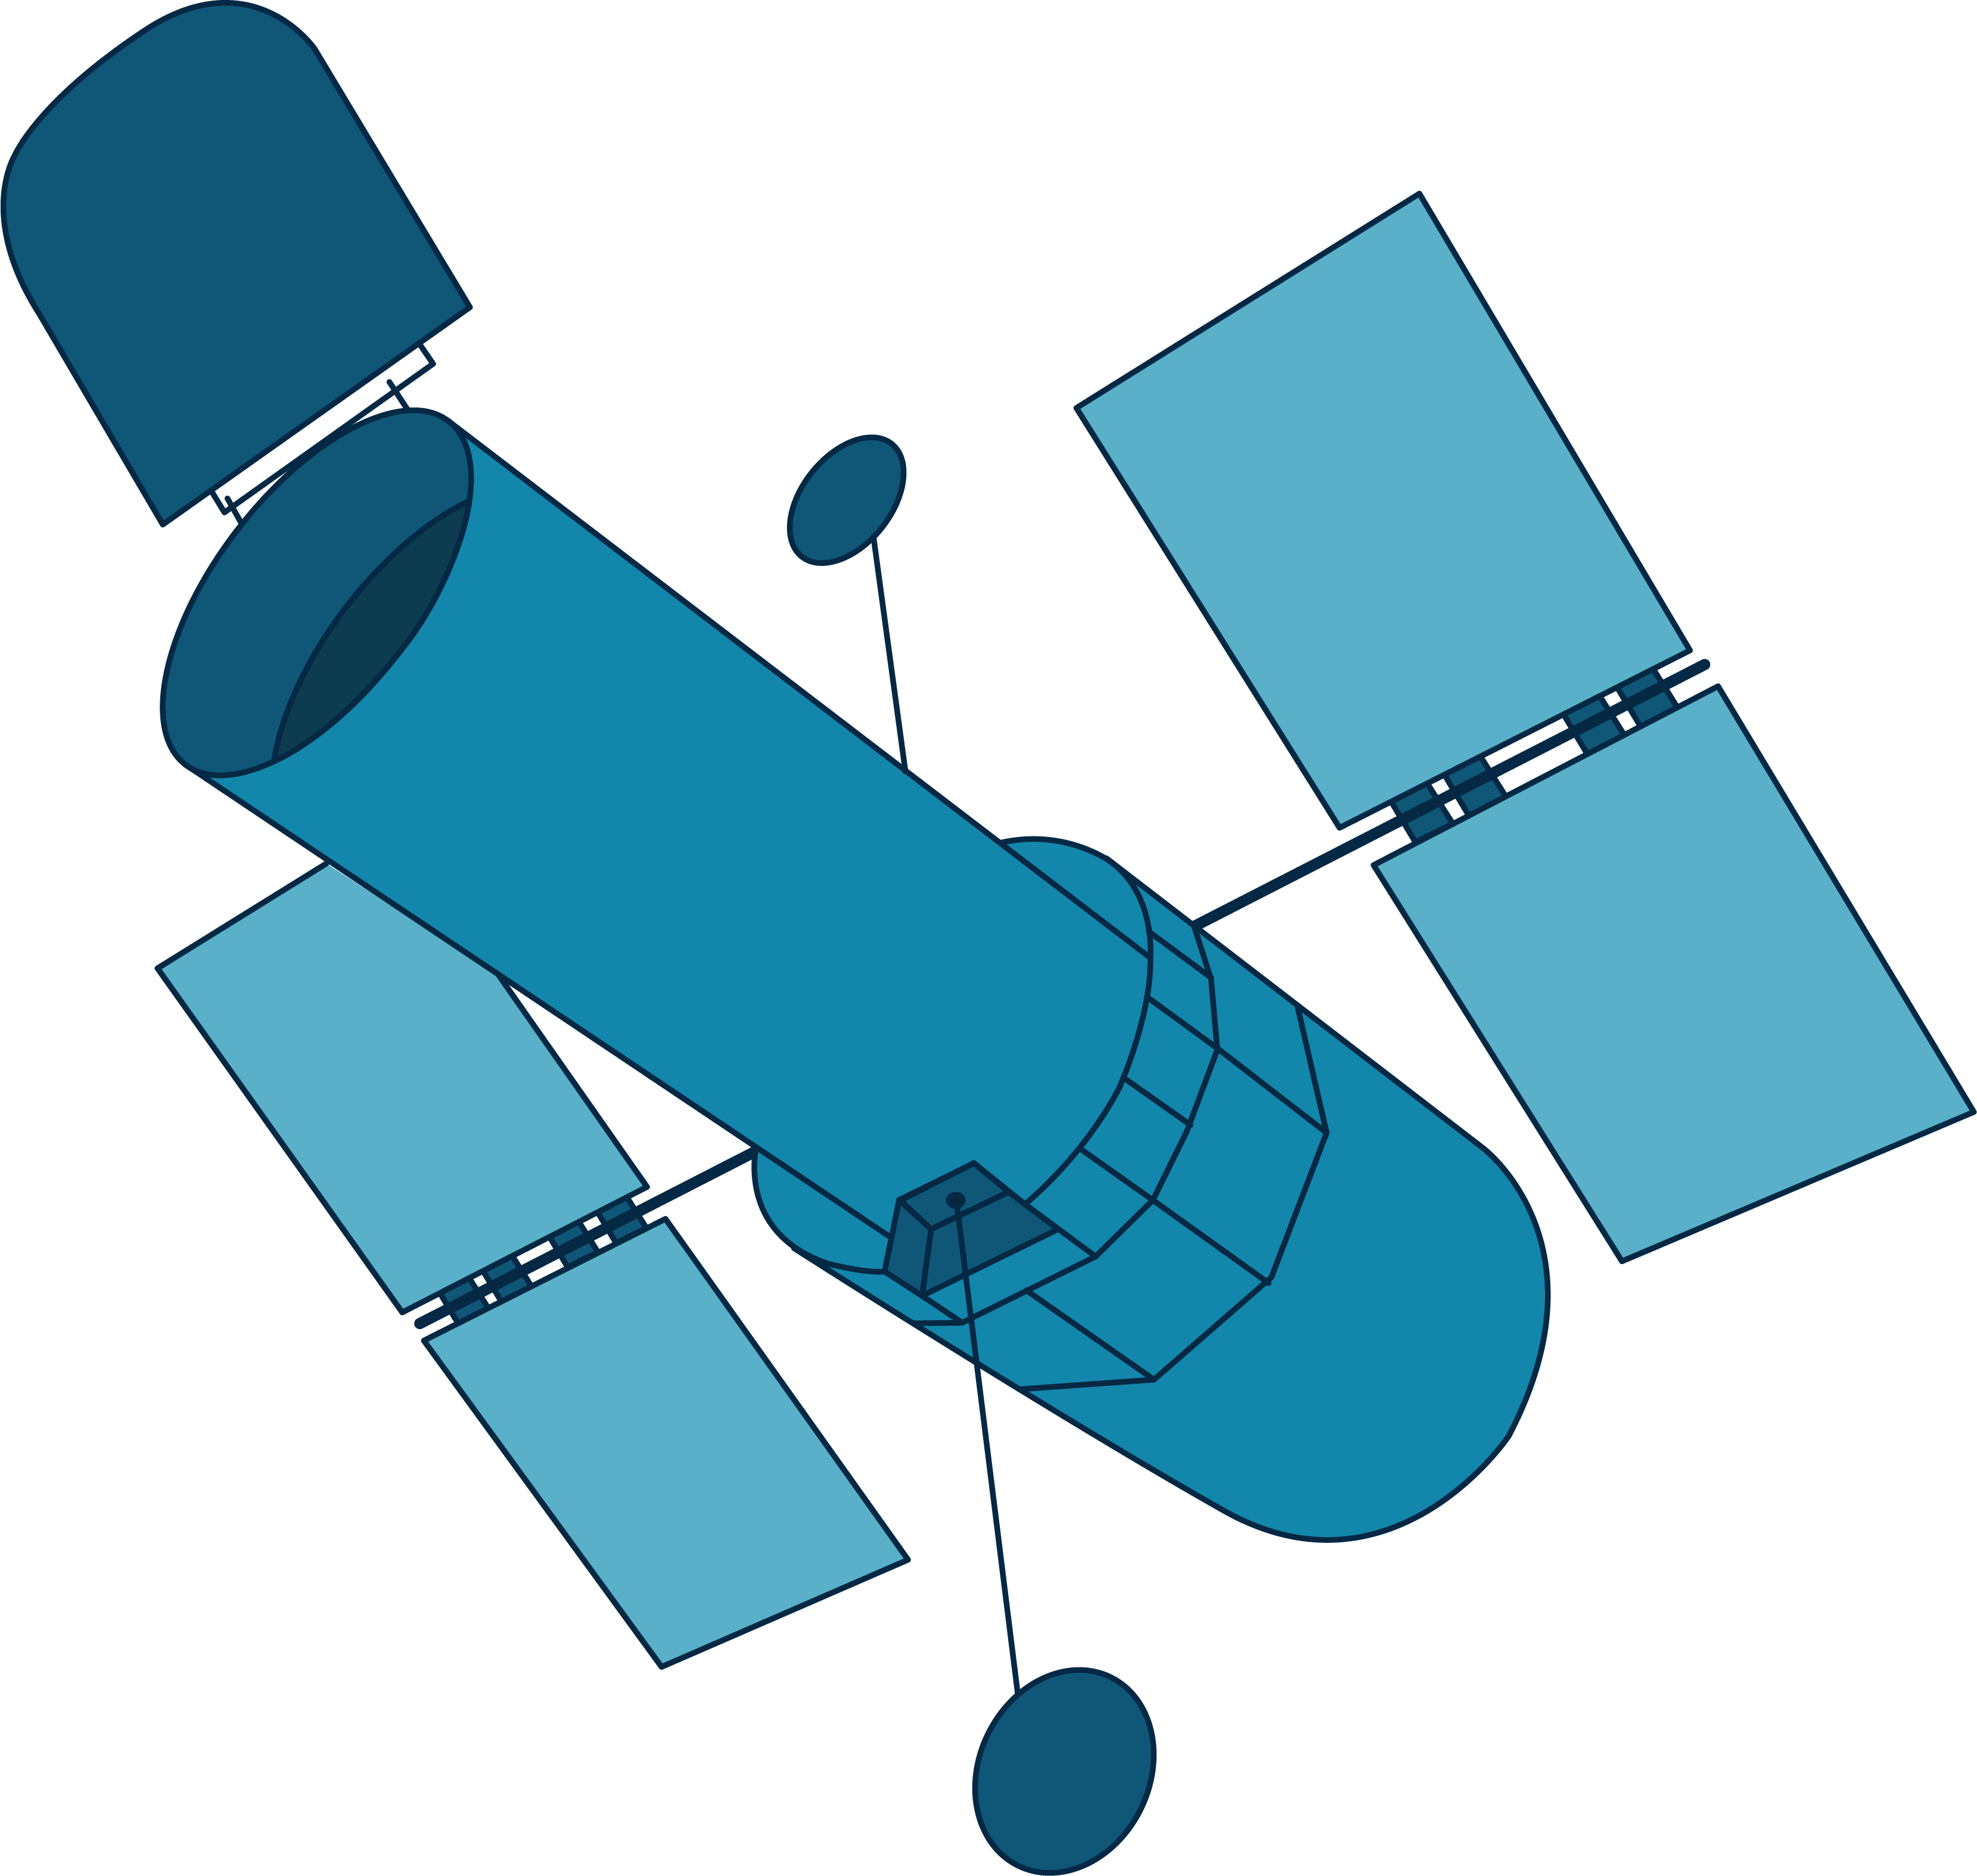 This Hubble illustration shows the space telescope in shades of blue. A main cylindrical body has an opening with a flap at the top. The spacecraft's main body connects to two sets of two panels jutting out from either side horizontally and two circular objects attached vertically.